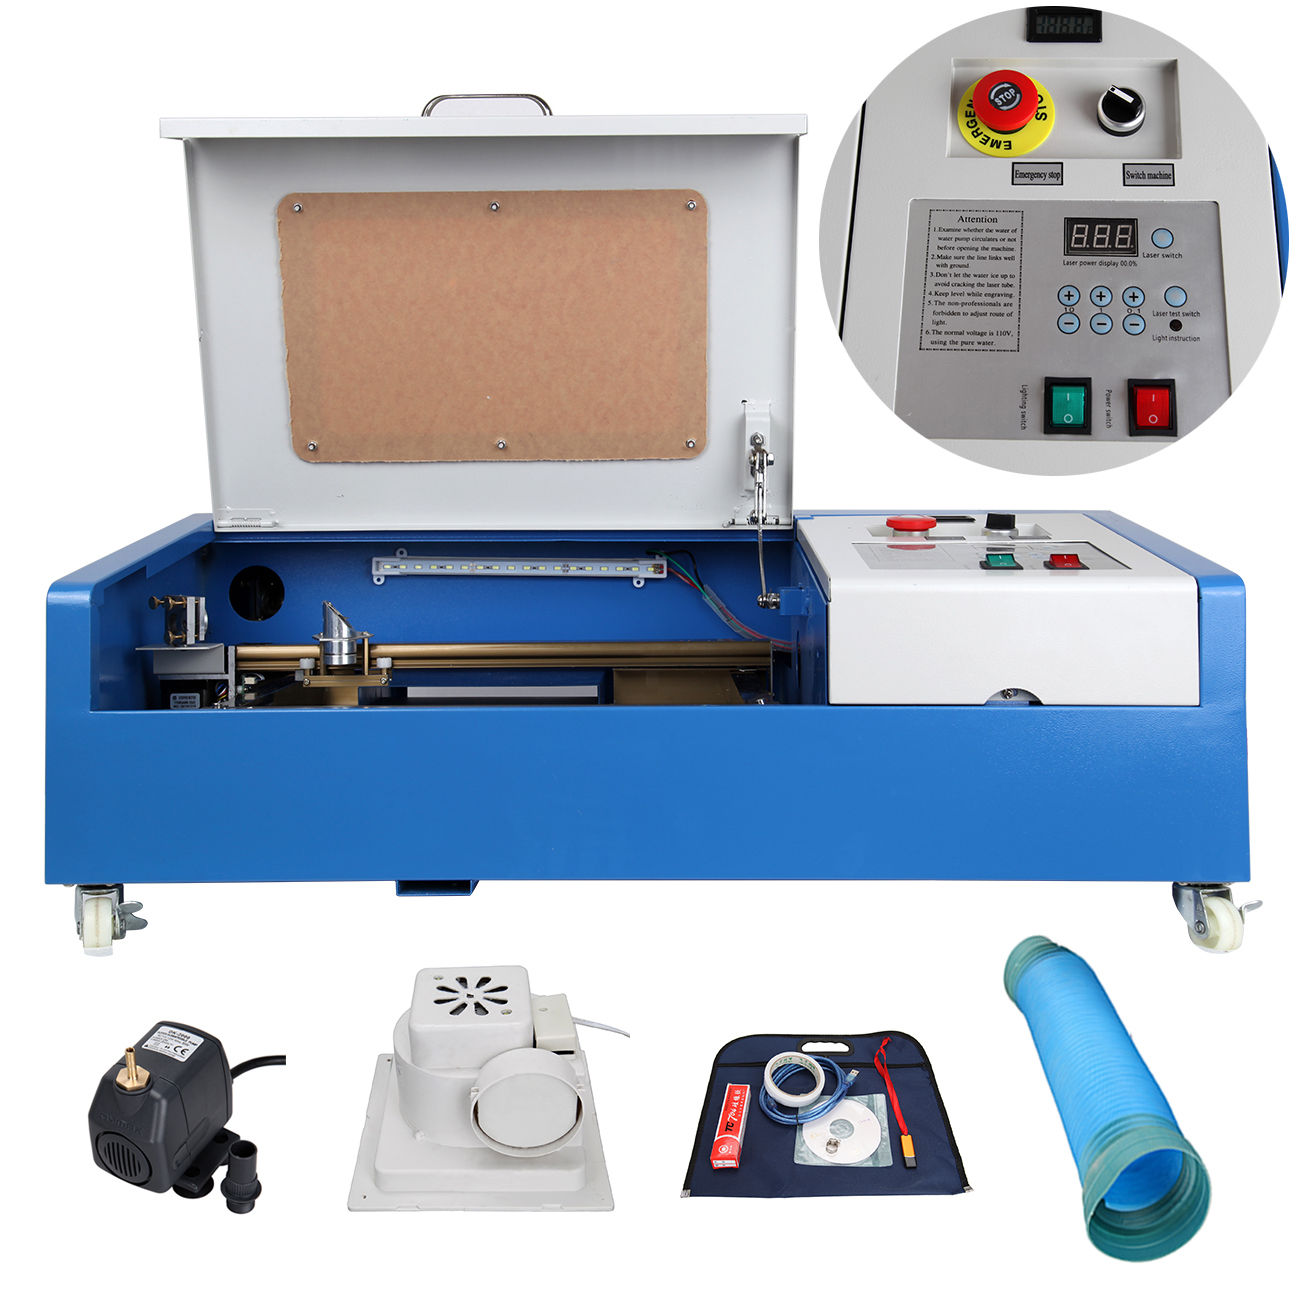 40W CO2 Laser Engraving Cutting Machine Engraver Cutter 300x200mm Usb Port for sale from Australia